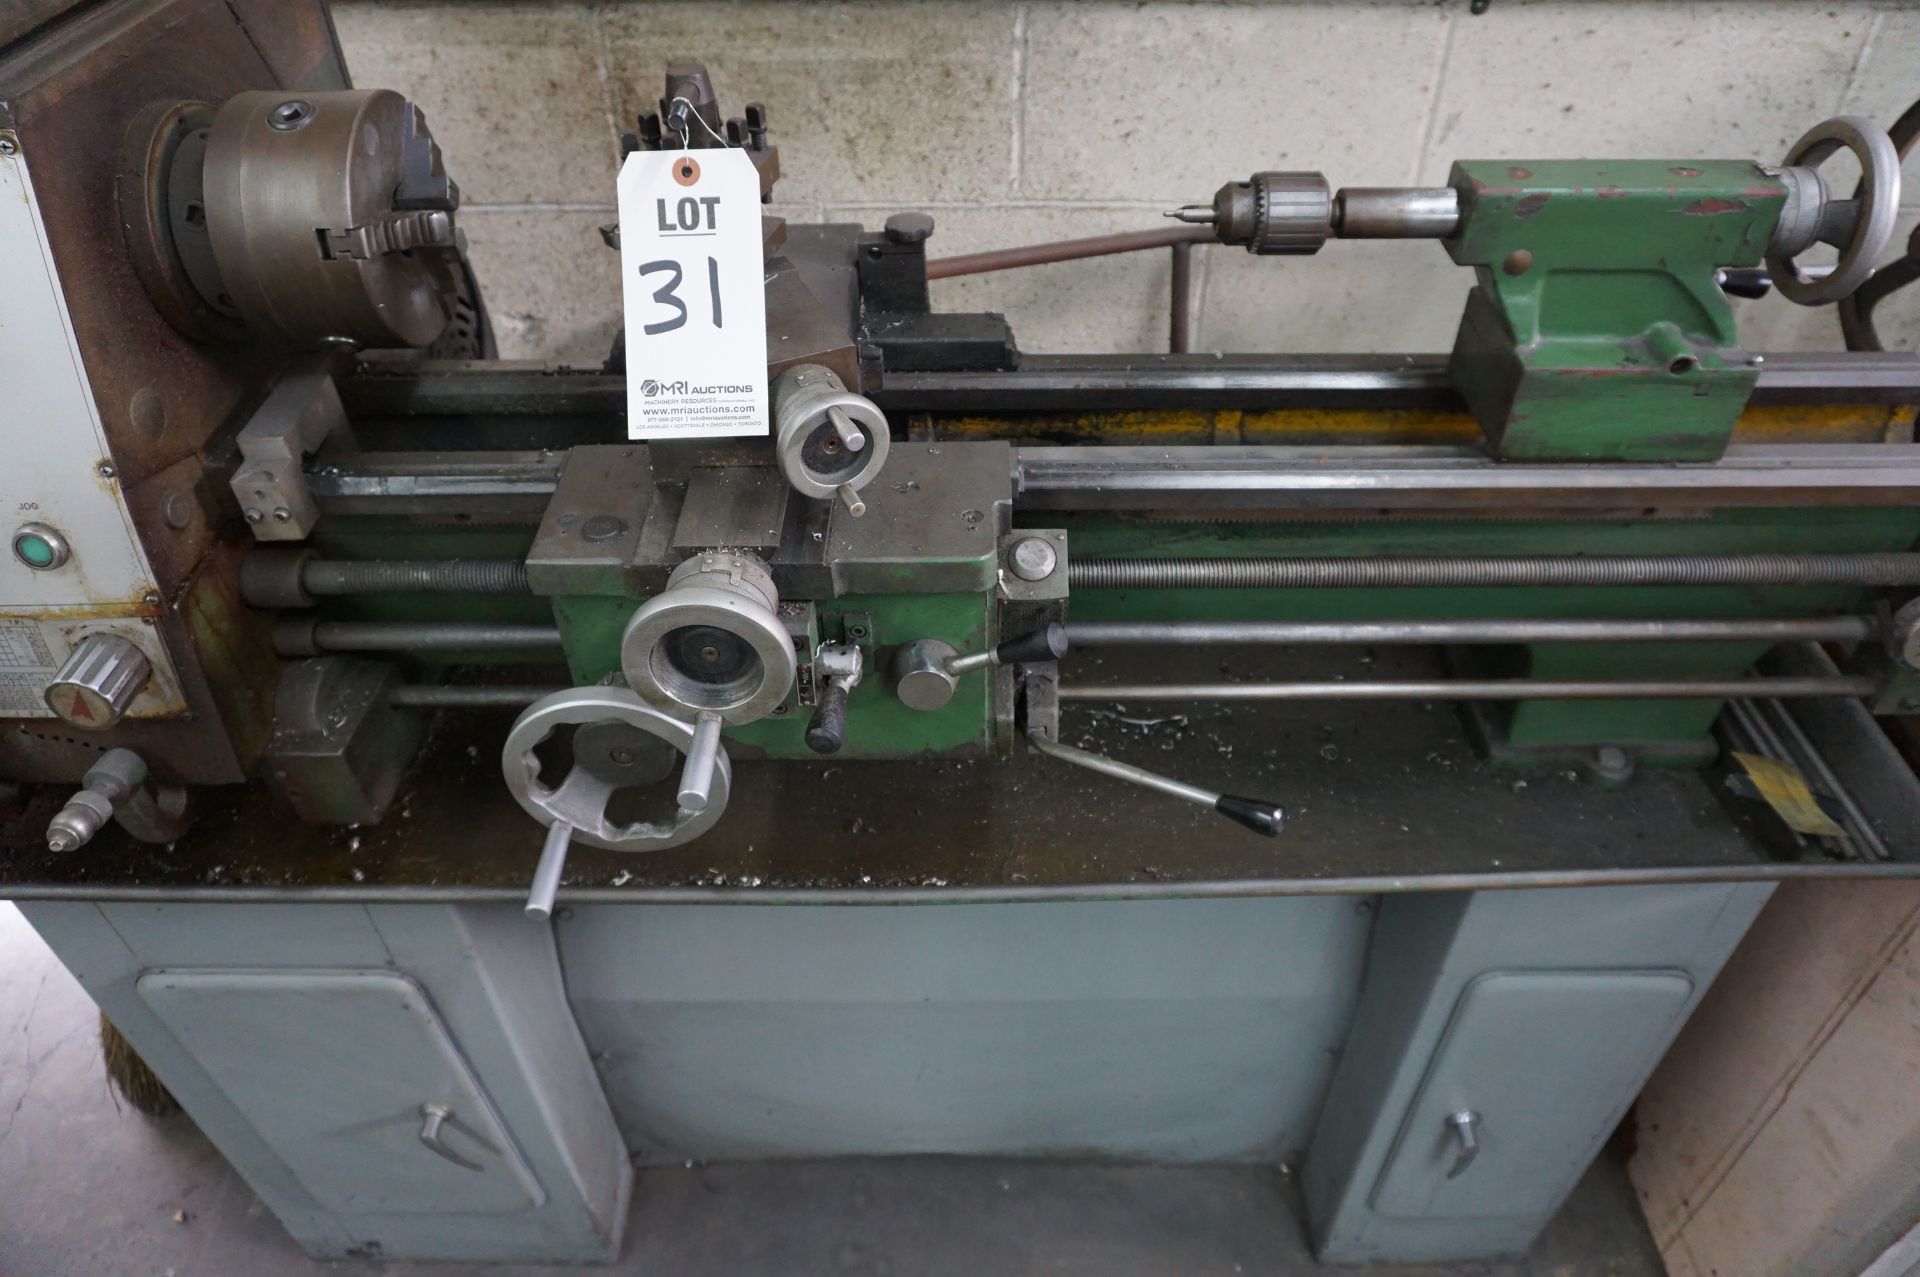 1984 ENCO MANUAL LATHE MODEL 02070 S/N 844107, 6" CHUCK, TAILSTOCK WITH JACOBS CHUCK - Image 2 of 9